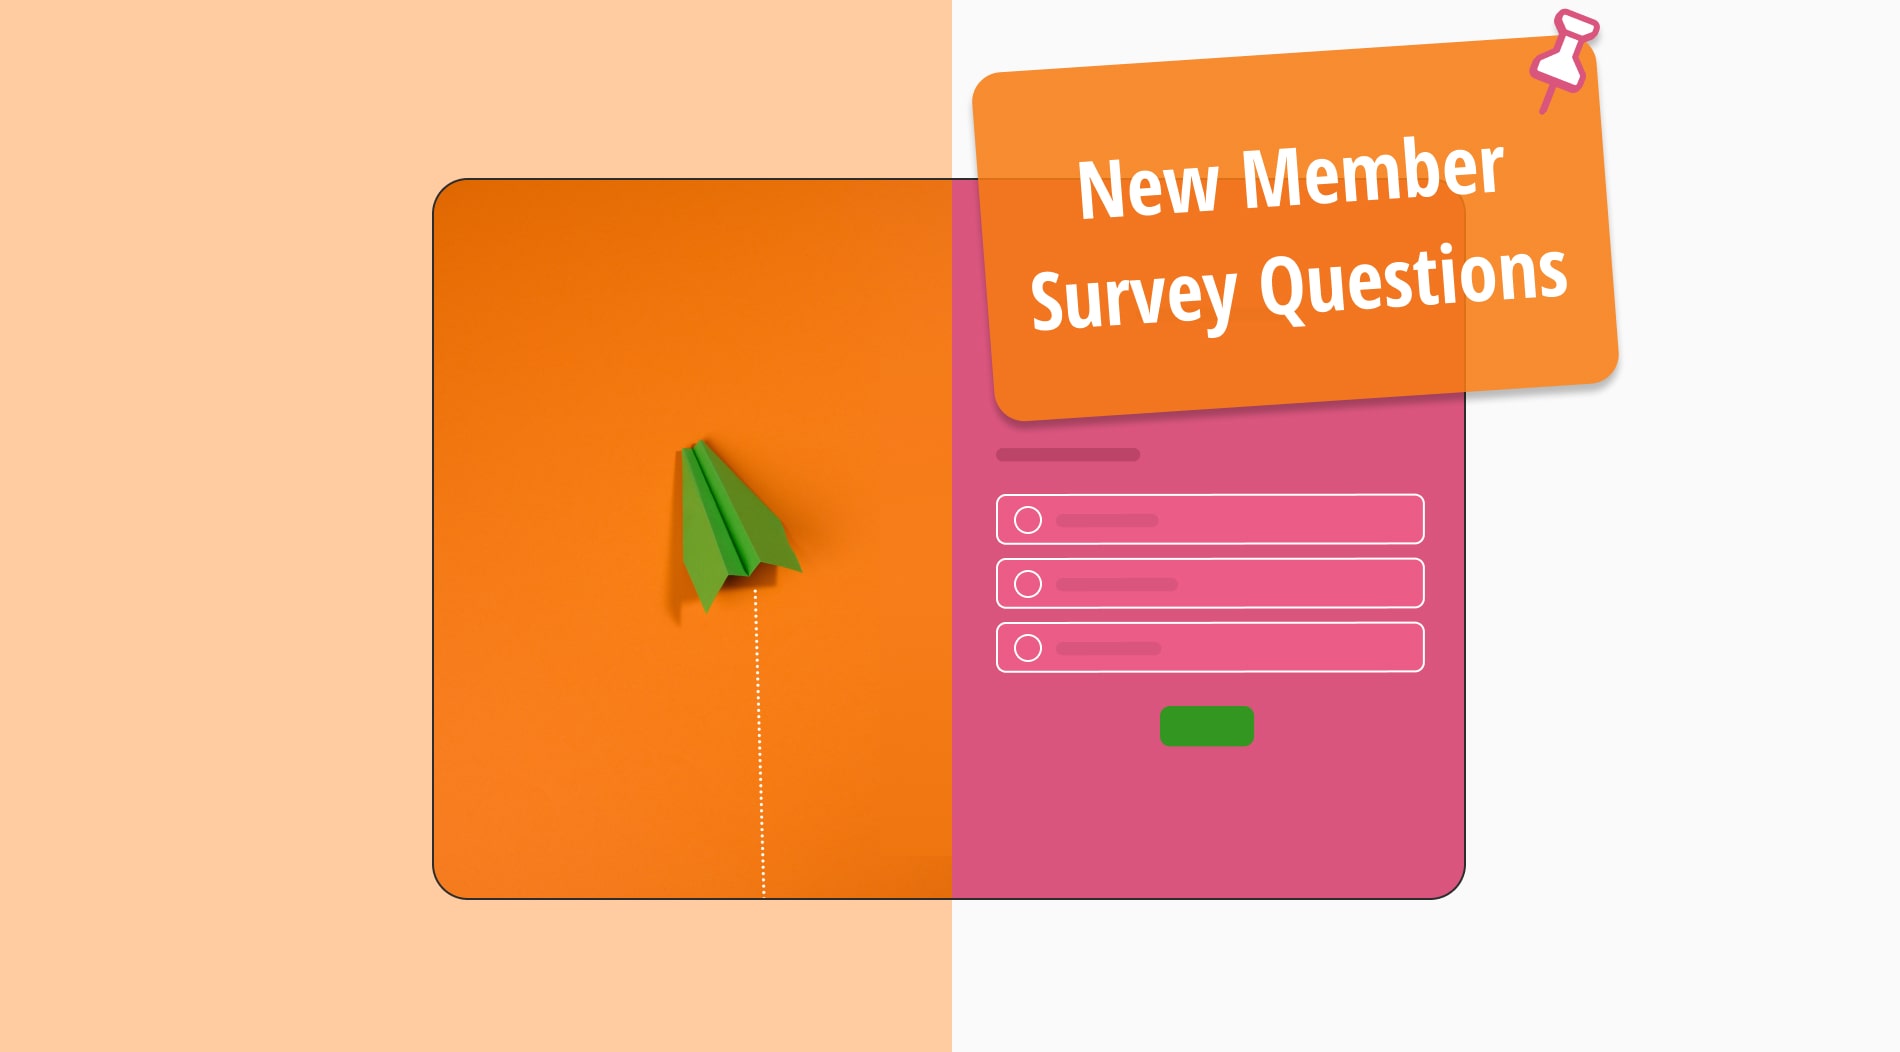 10+ New member survey questions (+ free templates & tips)